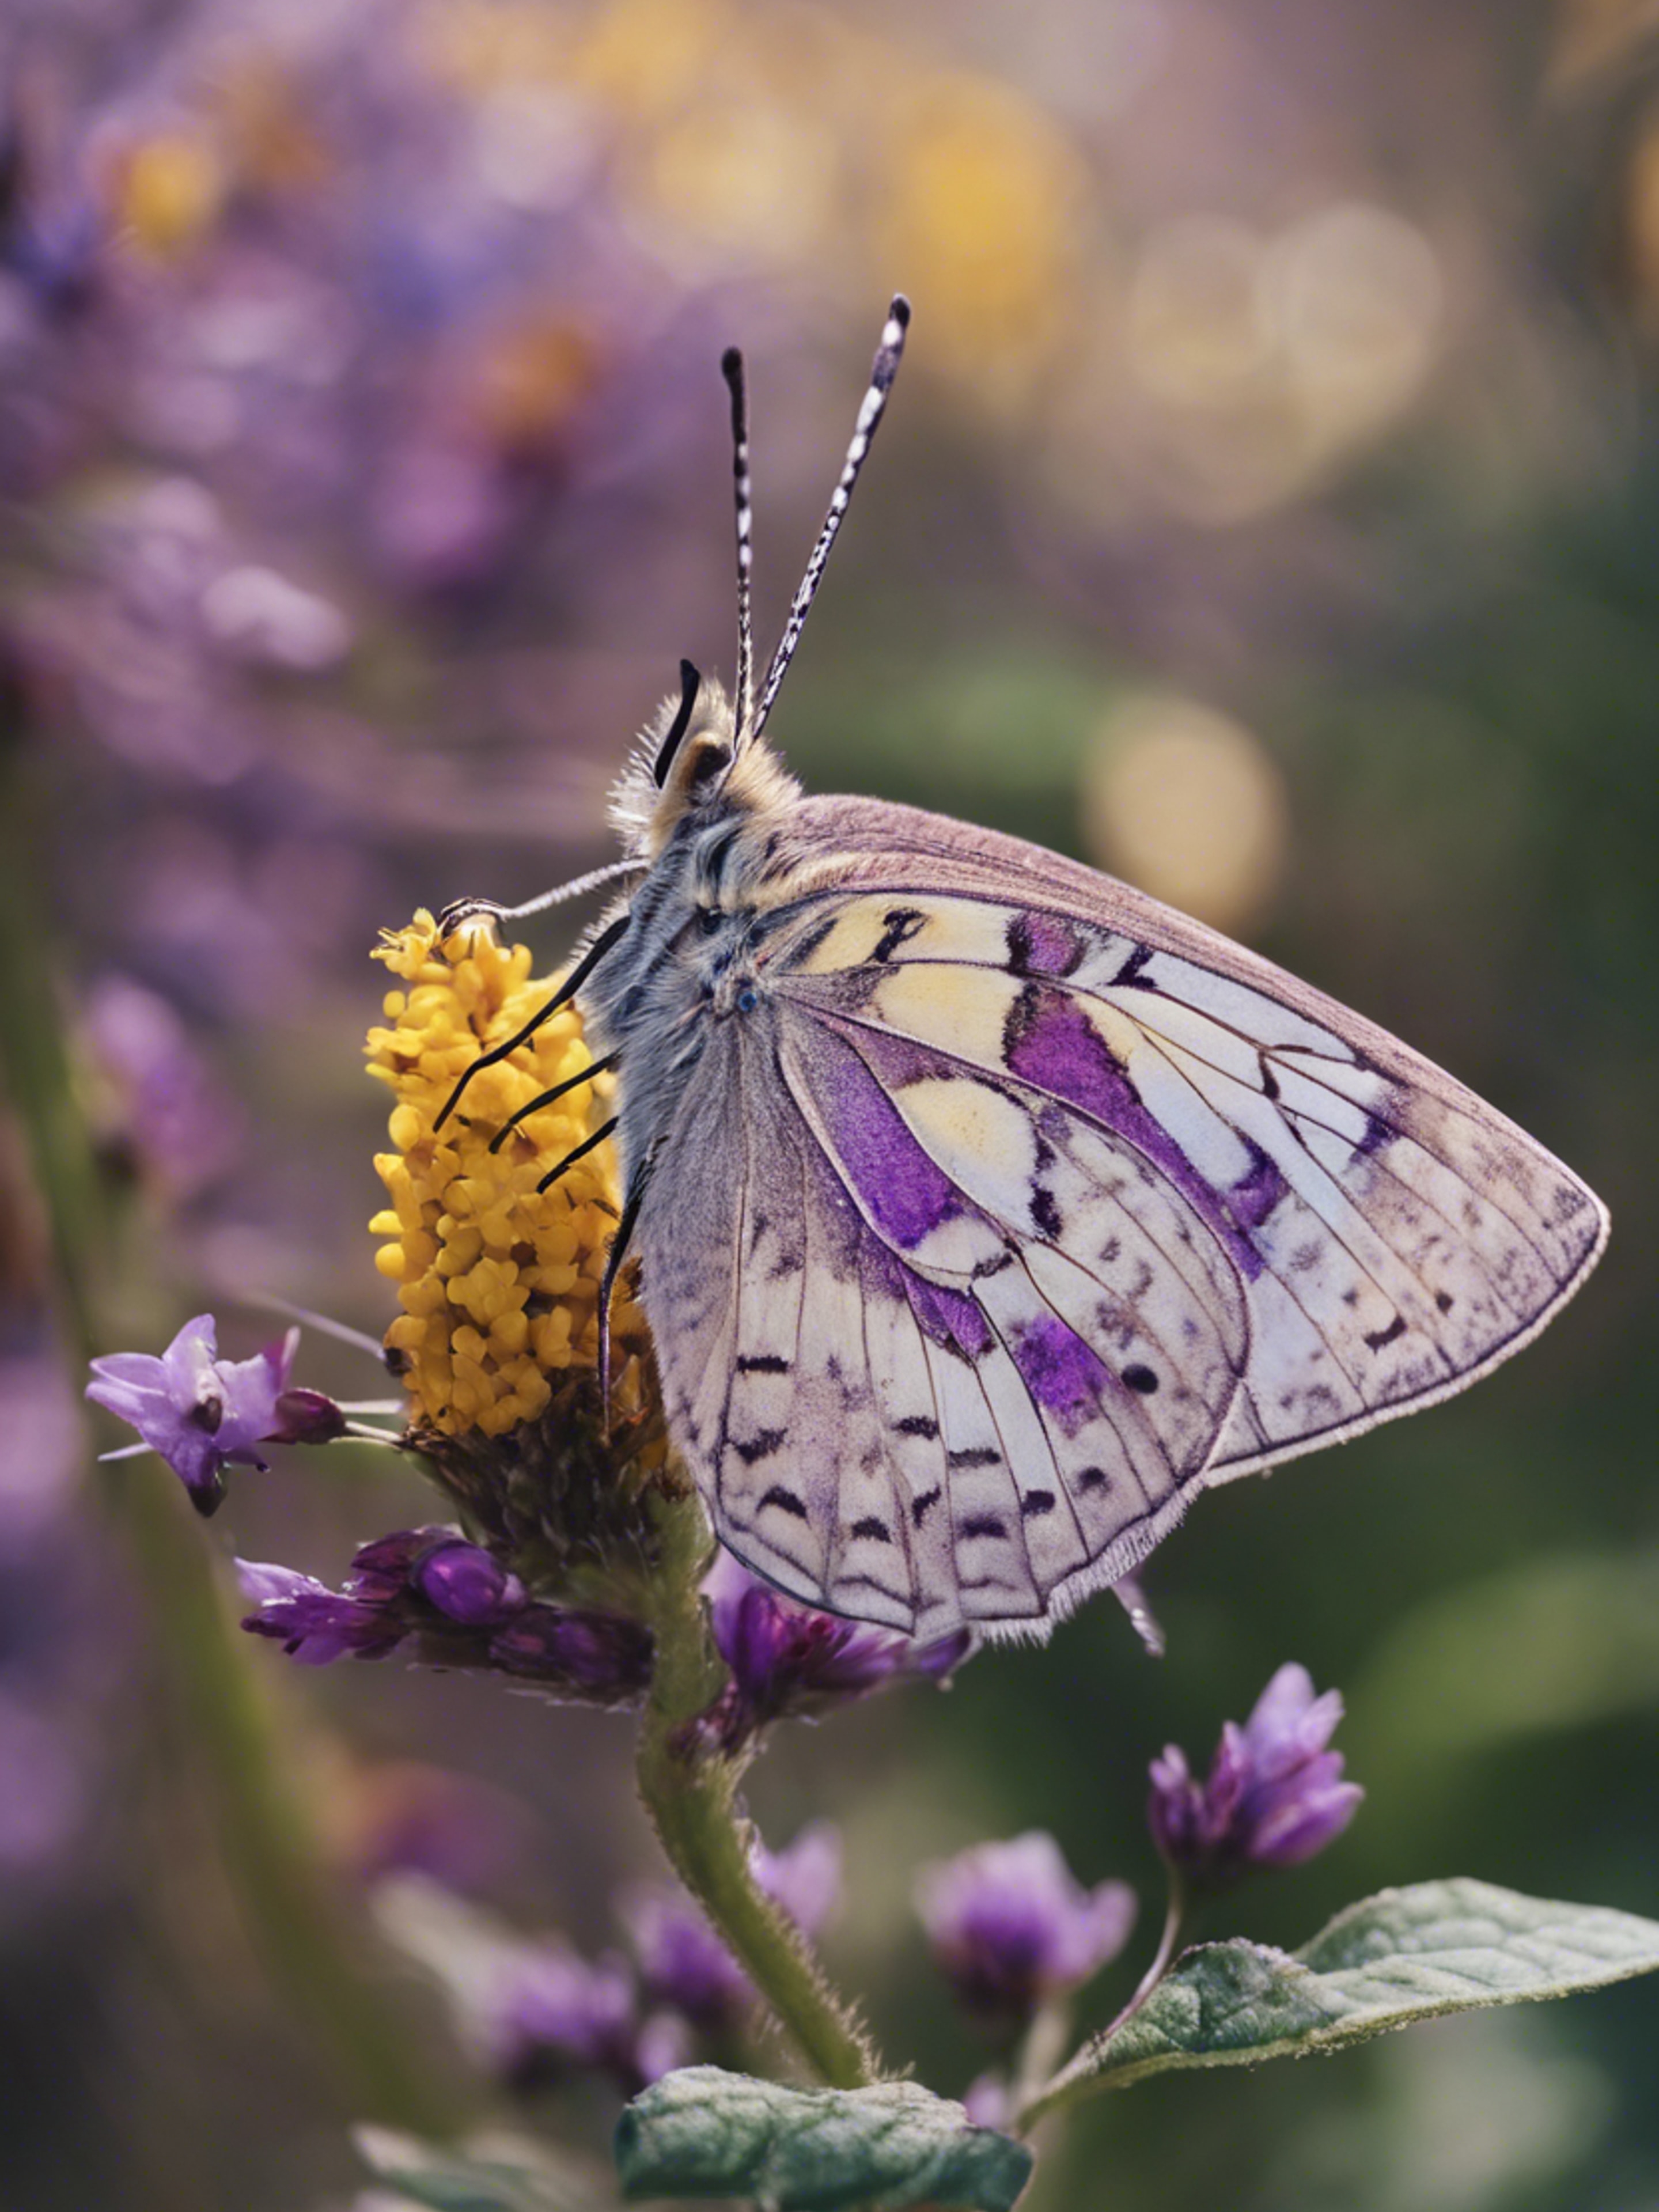 A beautiful butterfly with detailed purple and yellow wings resting on a blooming flower. Шпалери[3e976ae7be264a5da695]